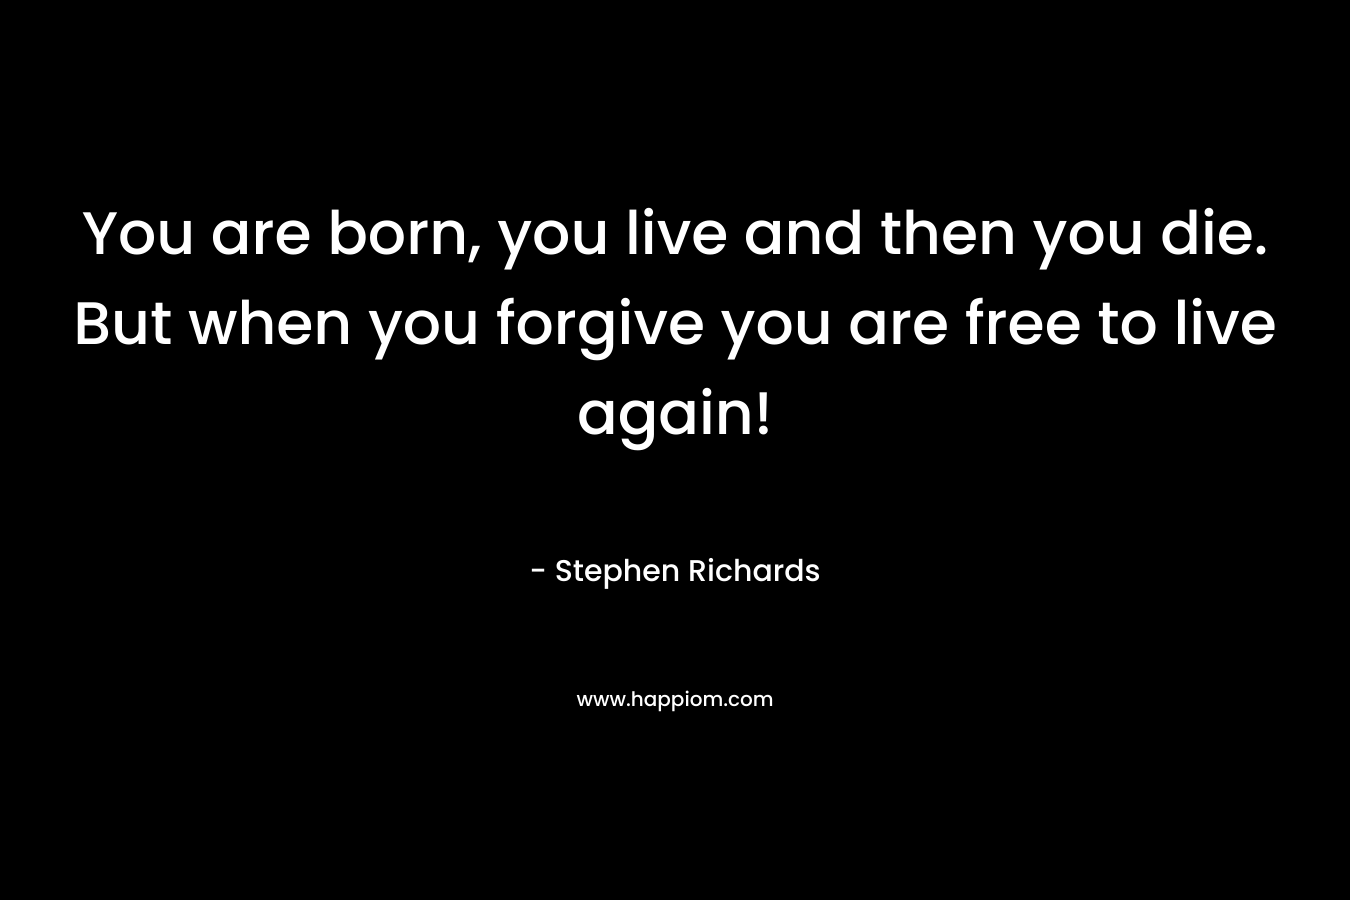 You are born, you live and then you die. But when you forgive you are free to live again!